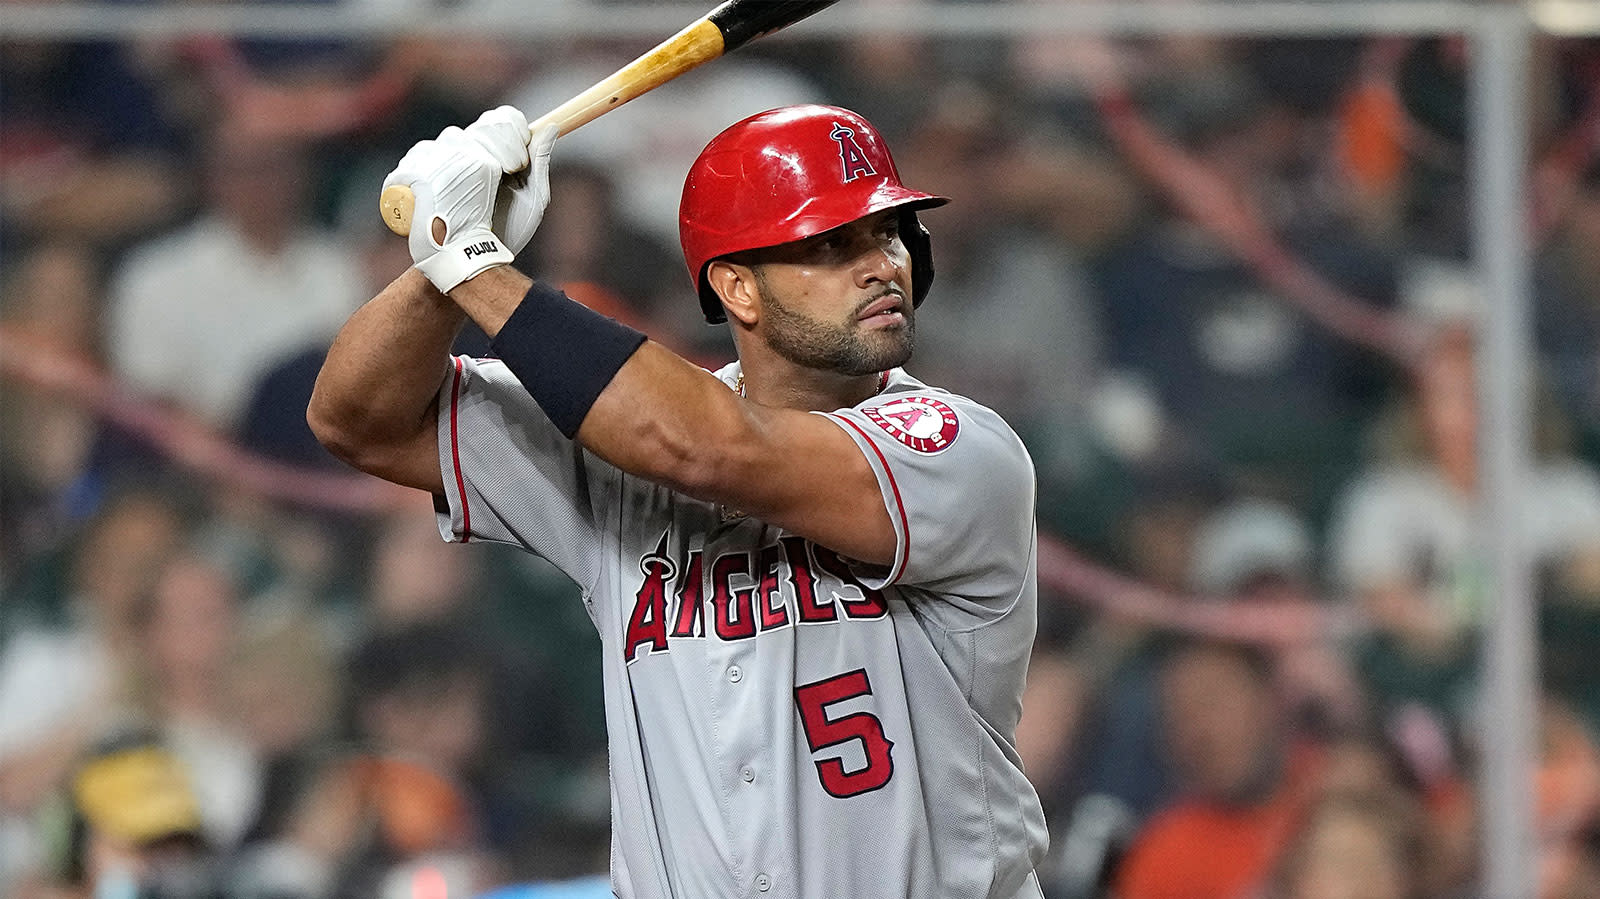 Albert Pujols Rumors: How Important Is His Age to His Market Value